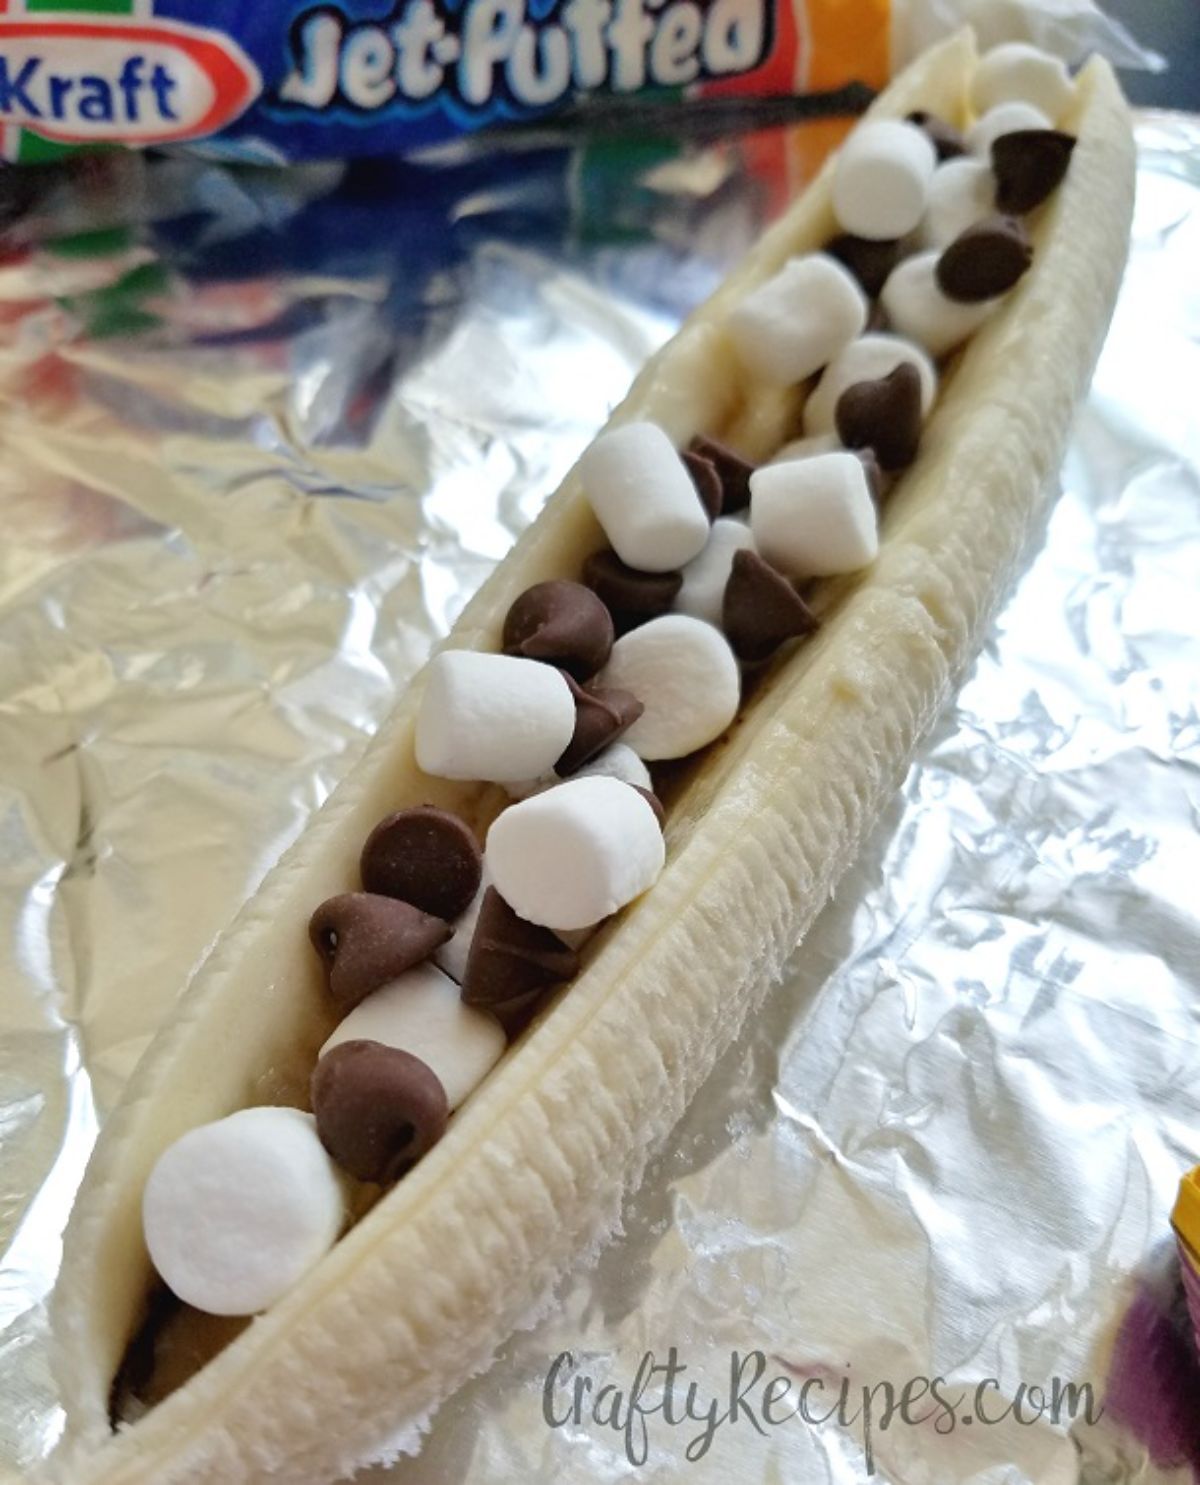 a banana split lengthways and filled with chocolate chips and mini marshmallows